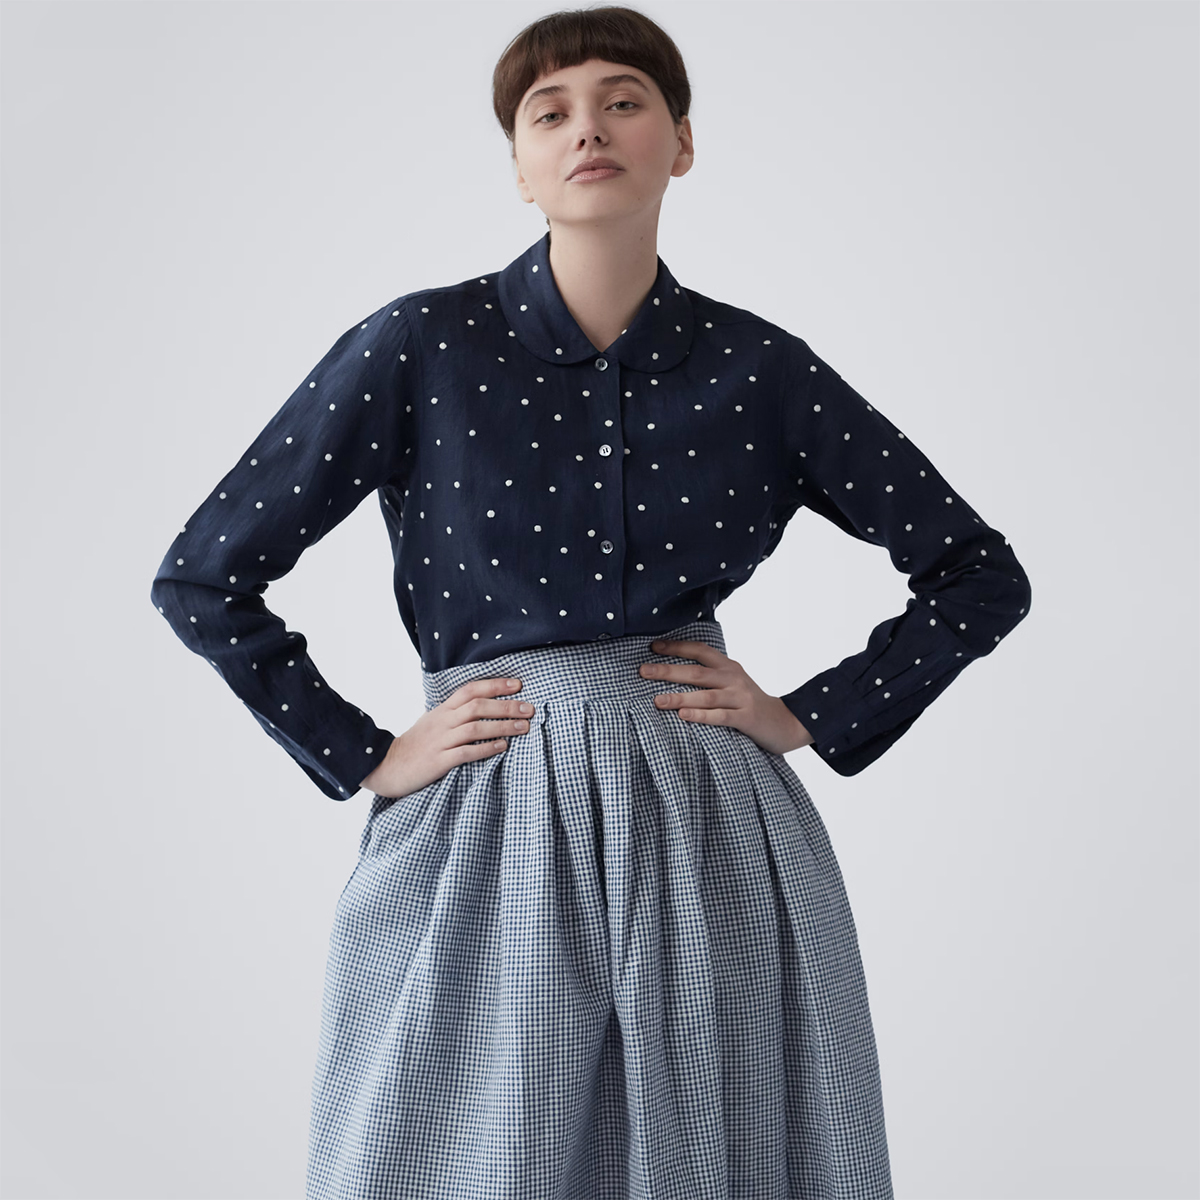 Jupe by Jakie  Skirt navy check